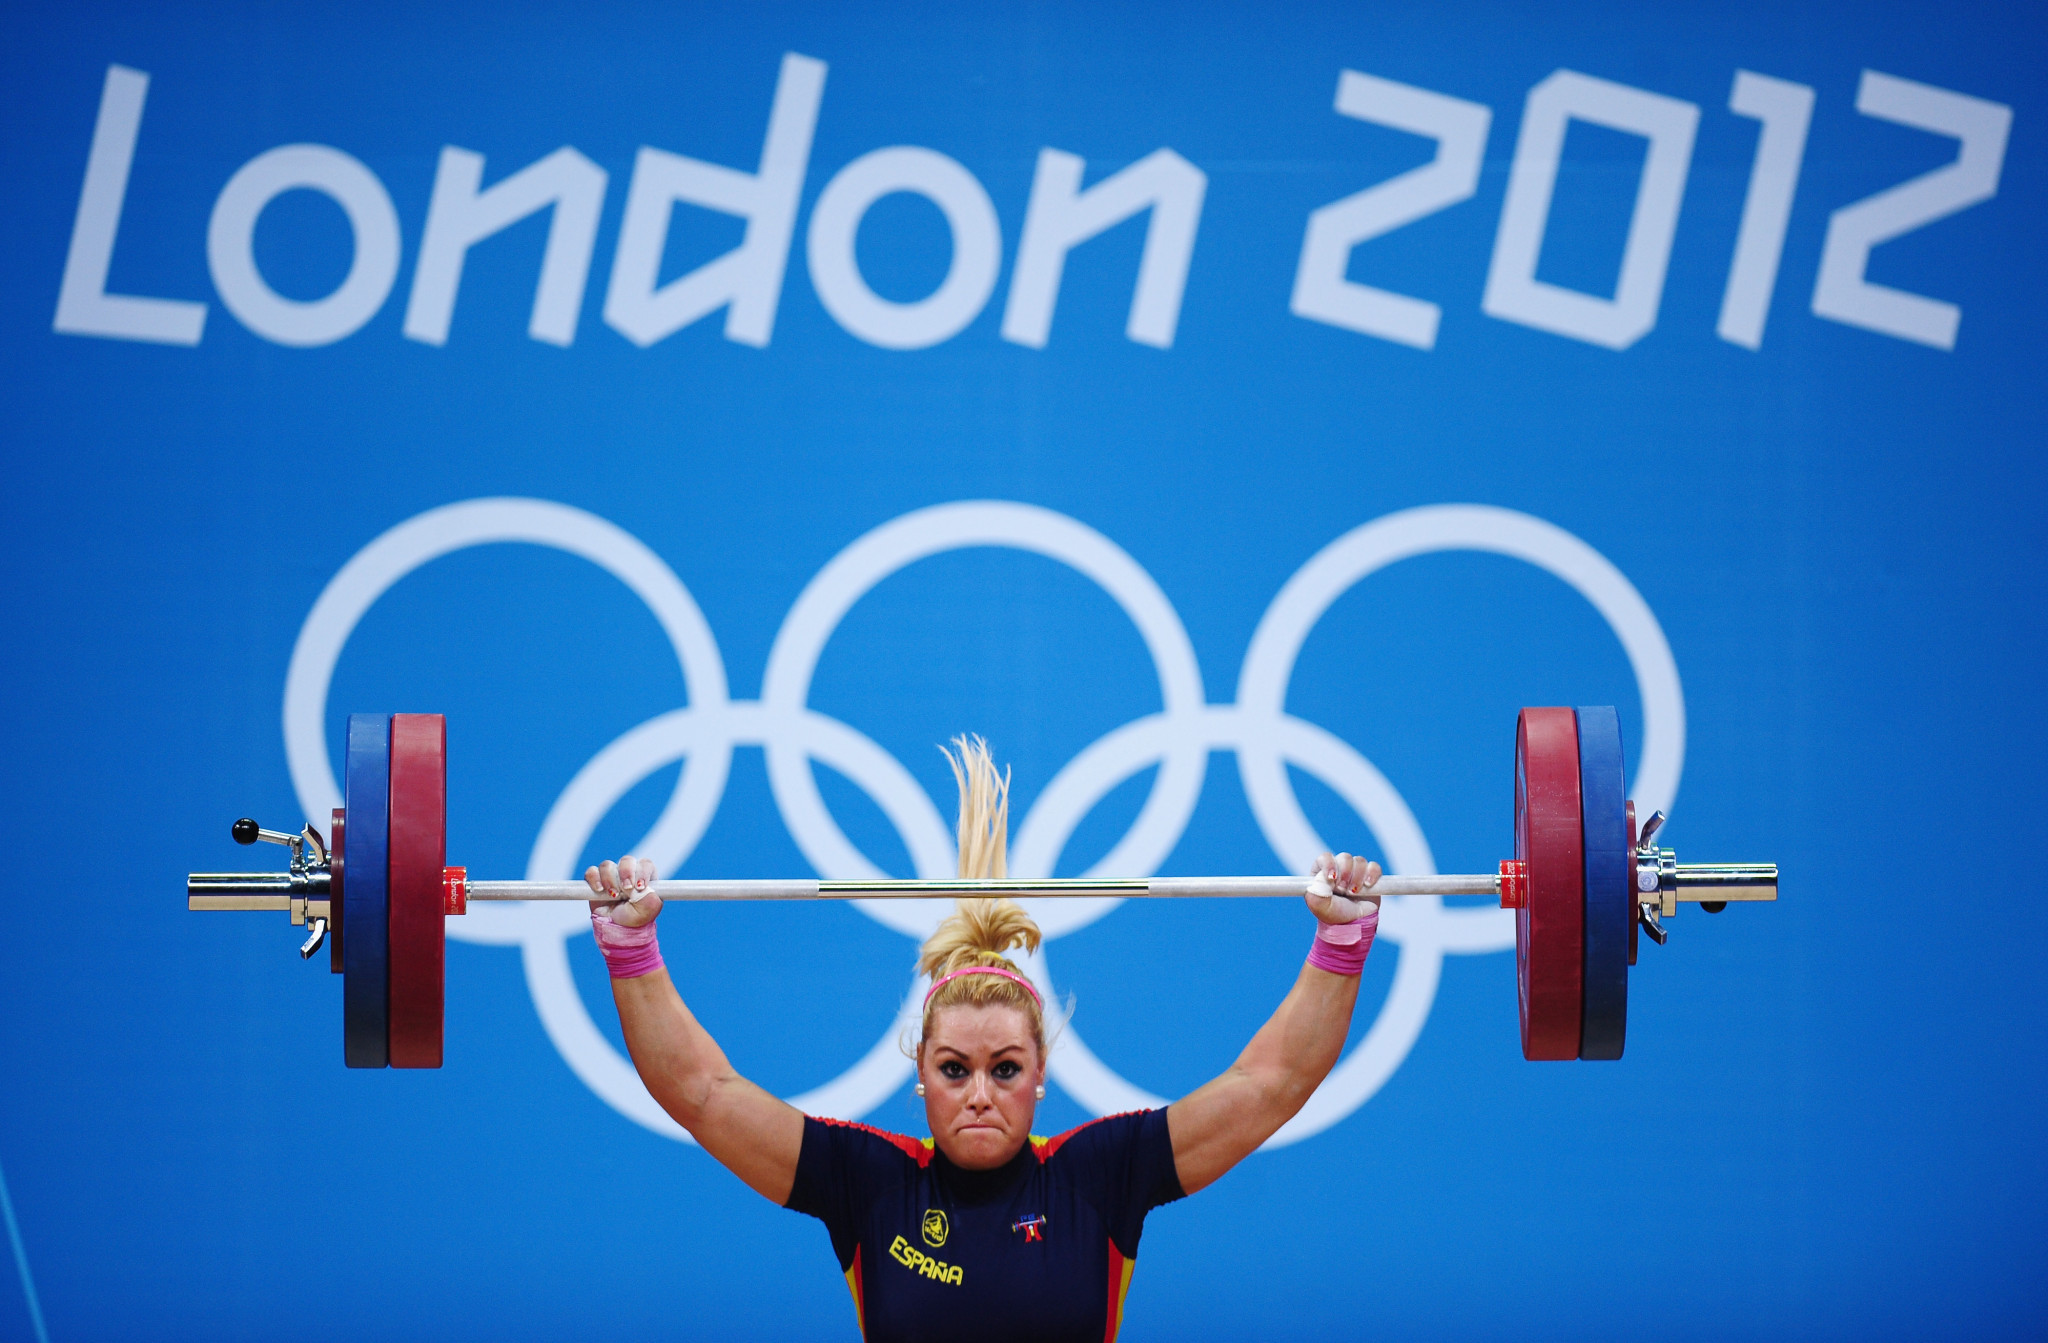 Lidia Valentín had originally finished fourth in the women's 75kg category at London 2012 ©Getty Images